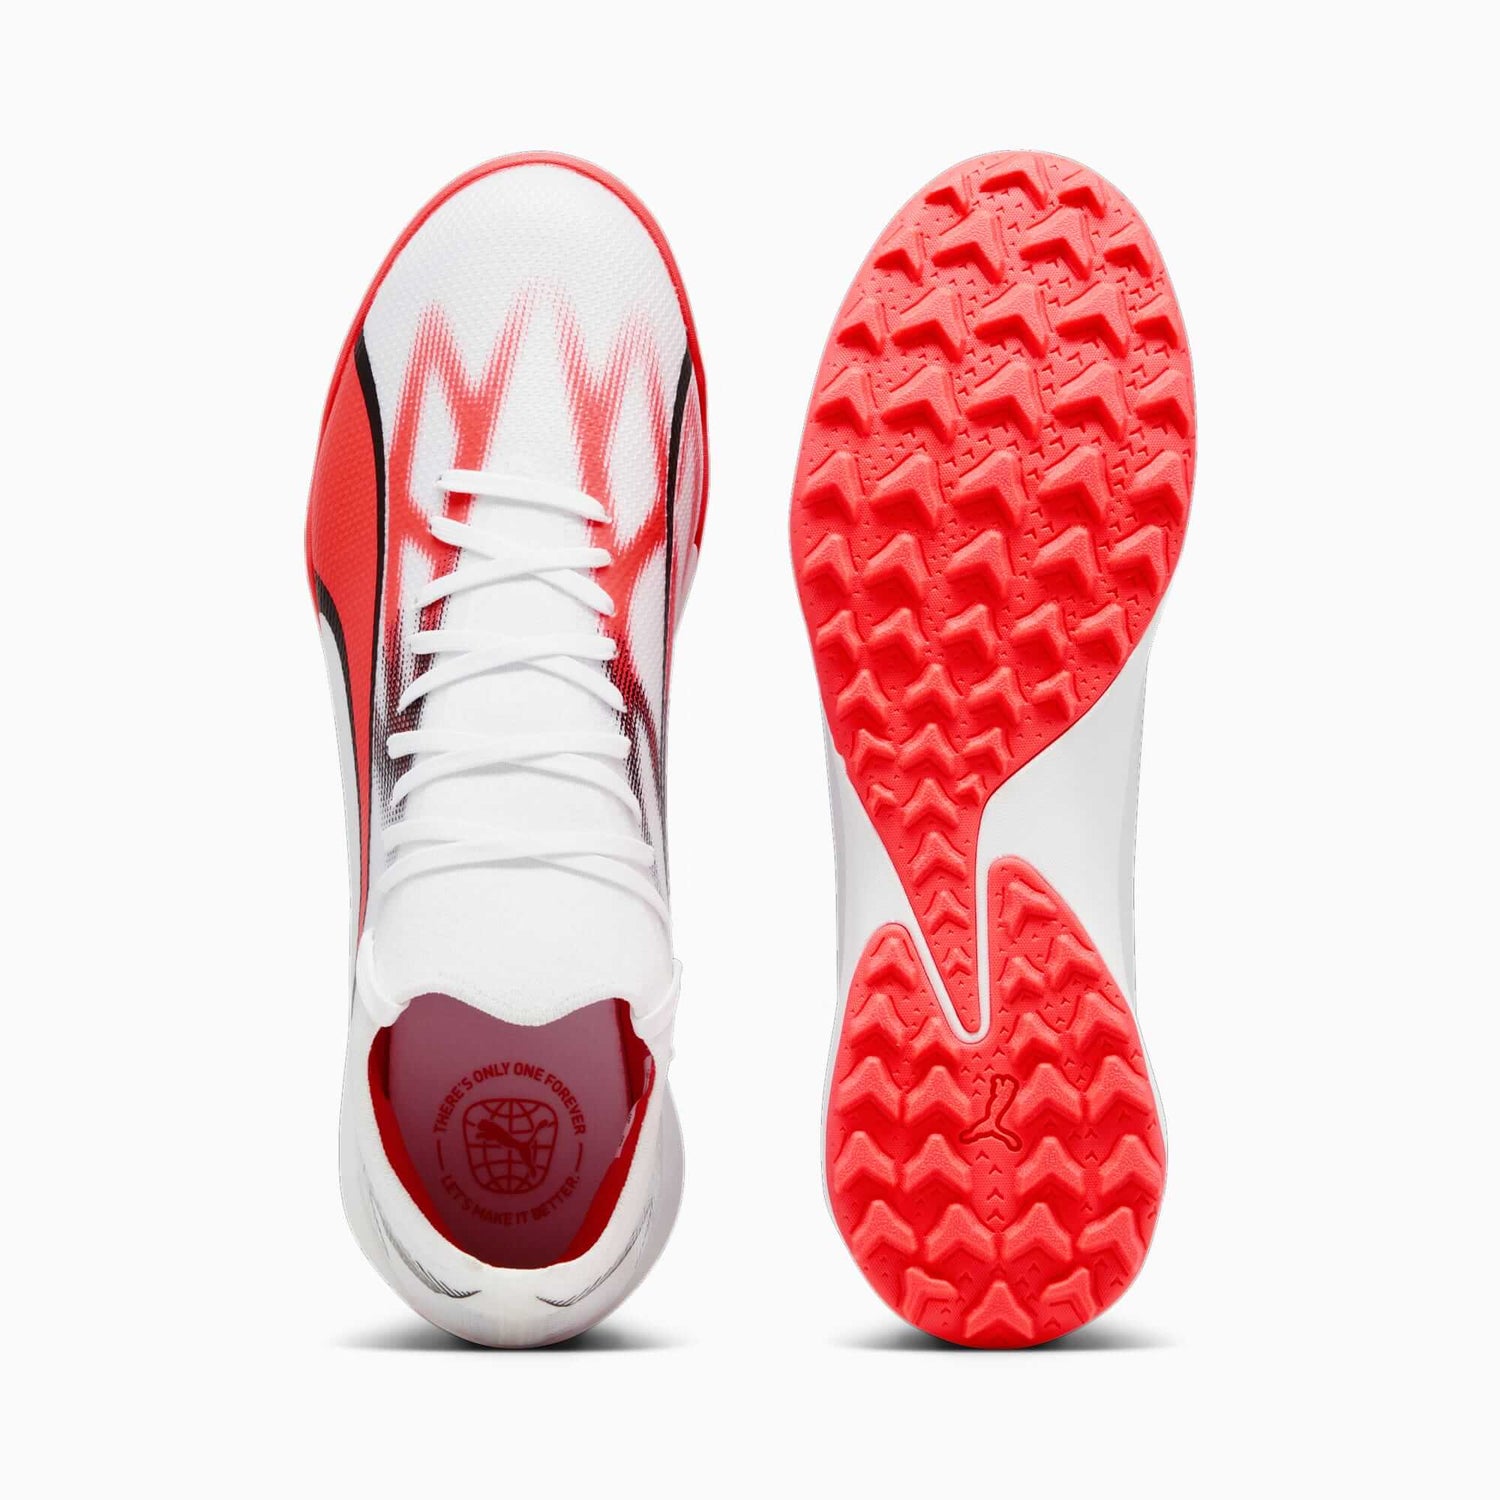 Puma Ultra Match Turf - Breakthrough Pack (FA23) (Pair - Top and Bottom)